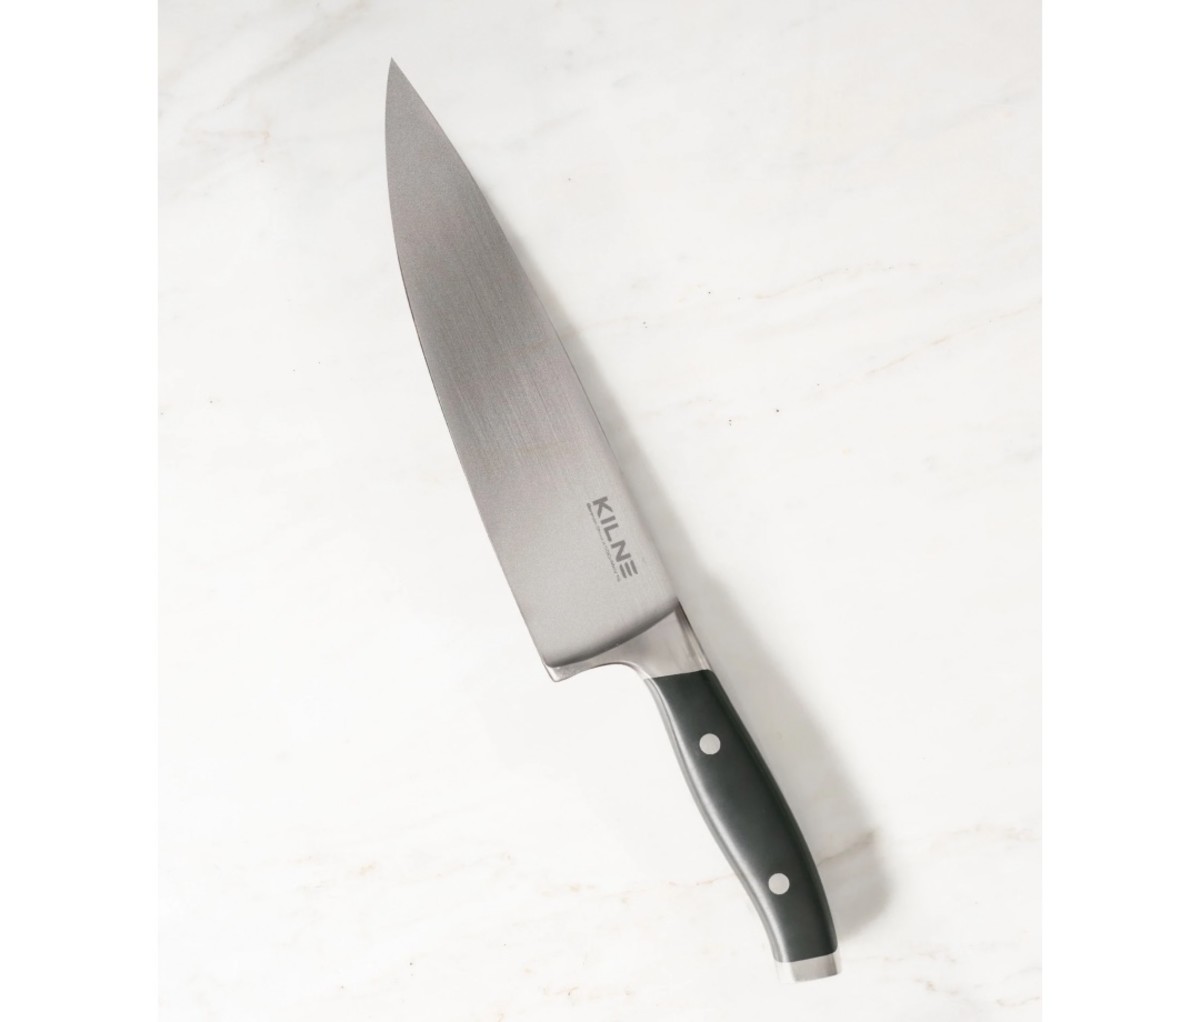 3 Best Kitchen Knives Every Chef Needs in Their Arsenal – Schmidt Bros.